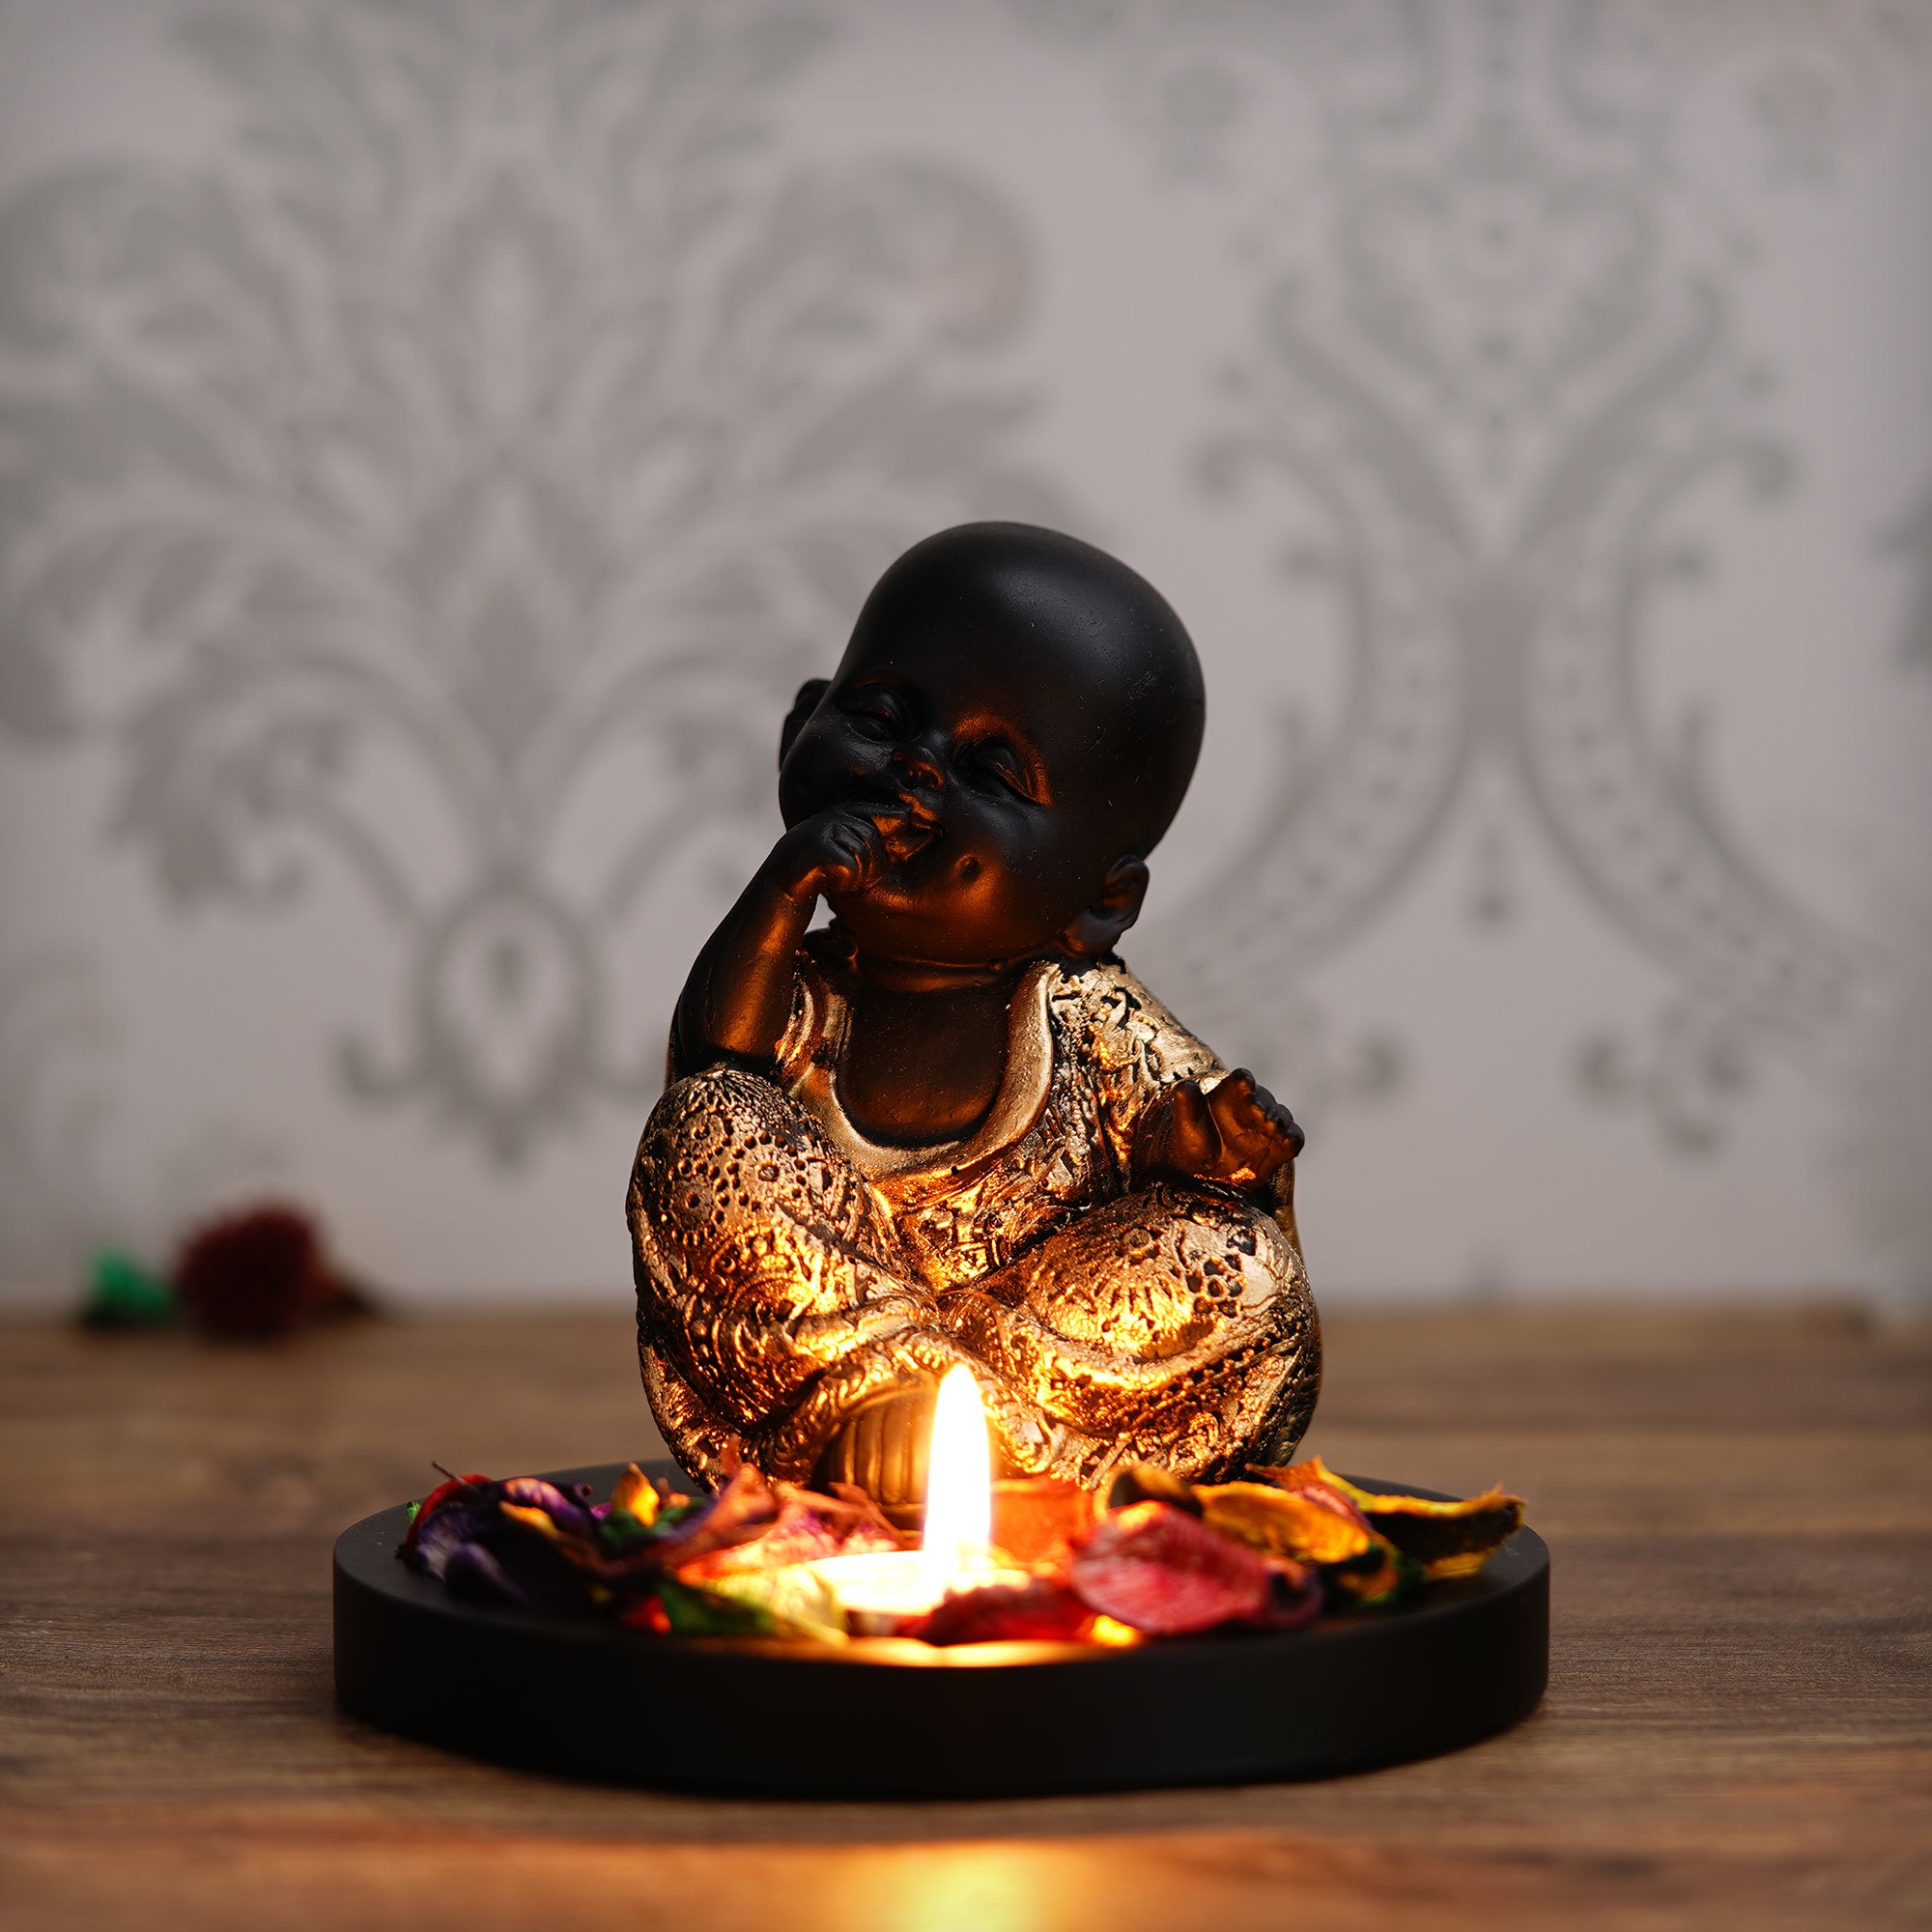 Decorative Smiling Golden Monk Buddha with Wooden Base, Fragranced Petals and Tealight 1